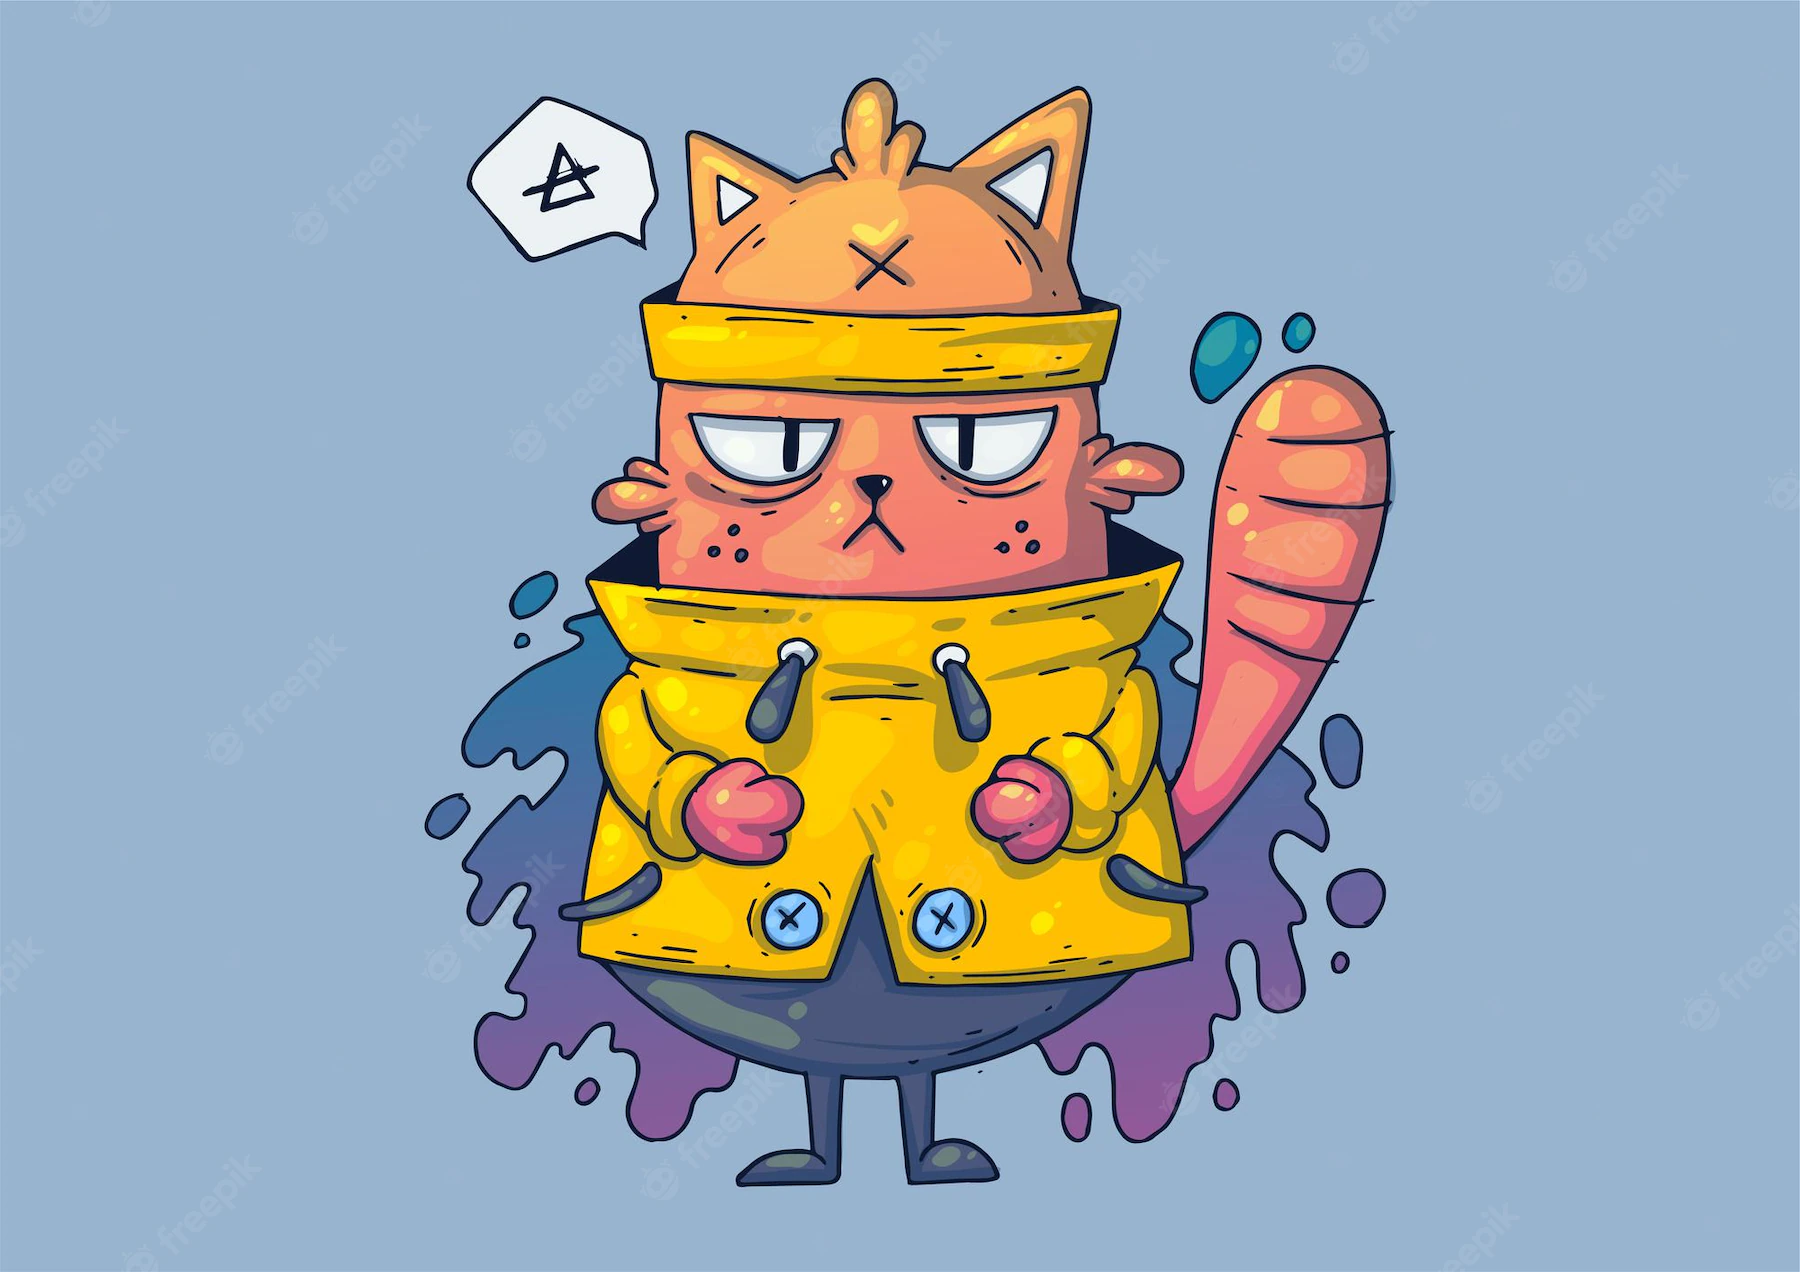 creative cartoon illustration funny cat in a yellow sweater 122058 892